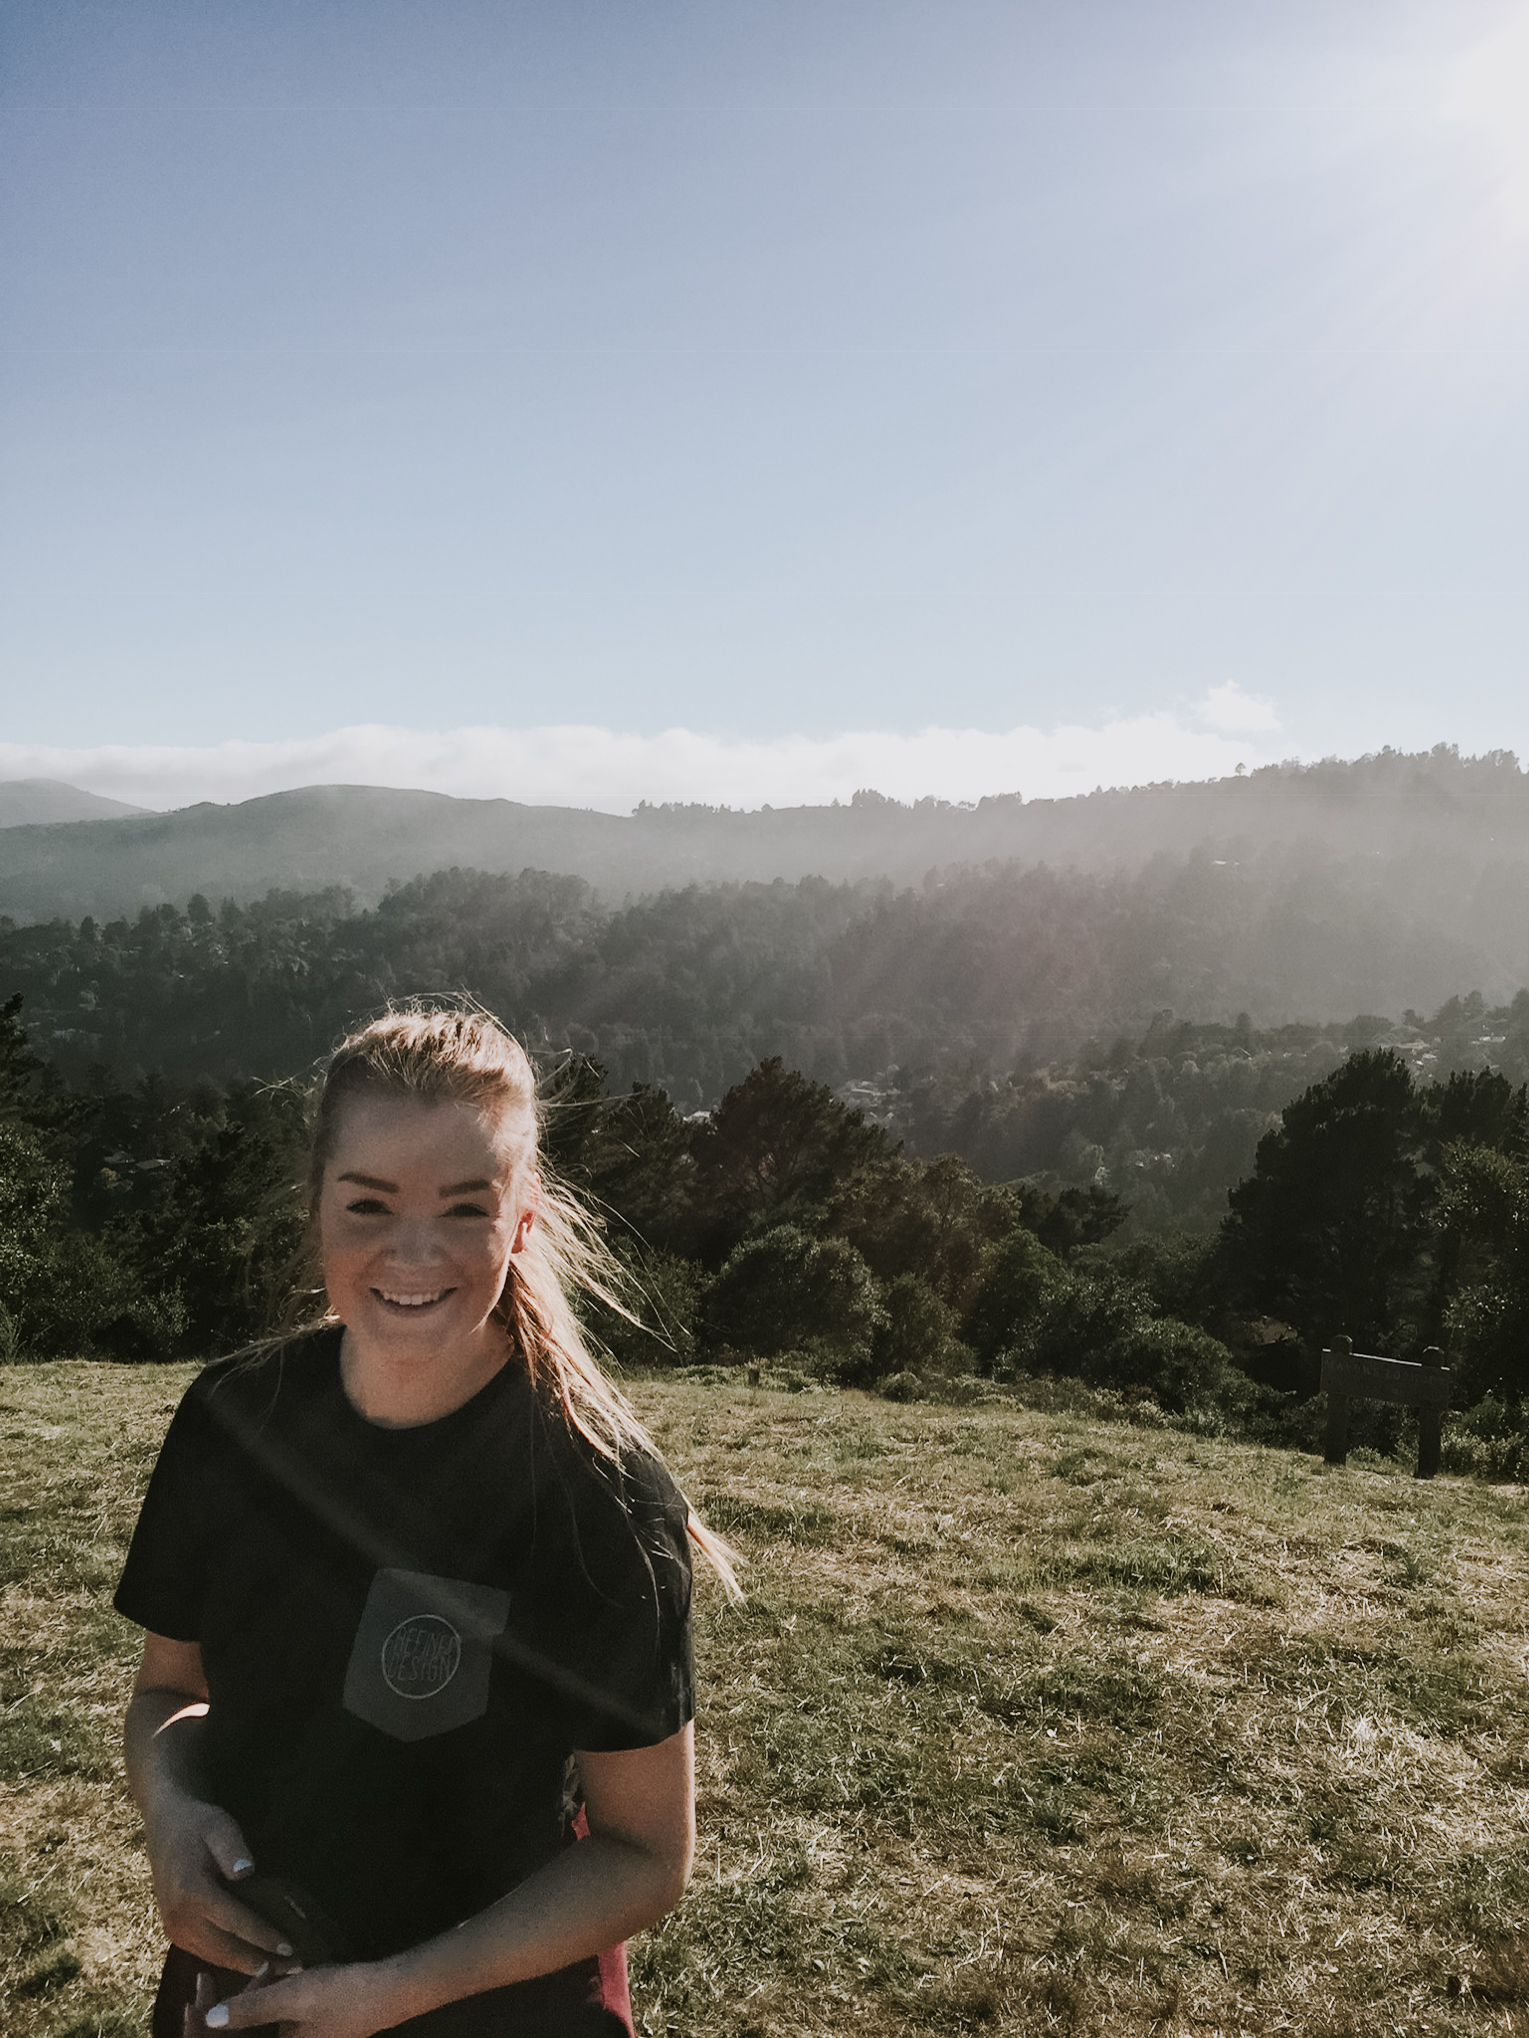 our trip to San Francisco - hiking in the mountains of Mill Valley